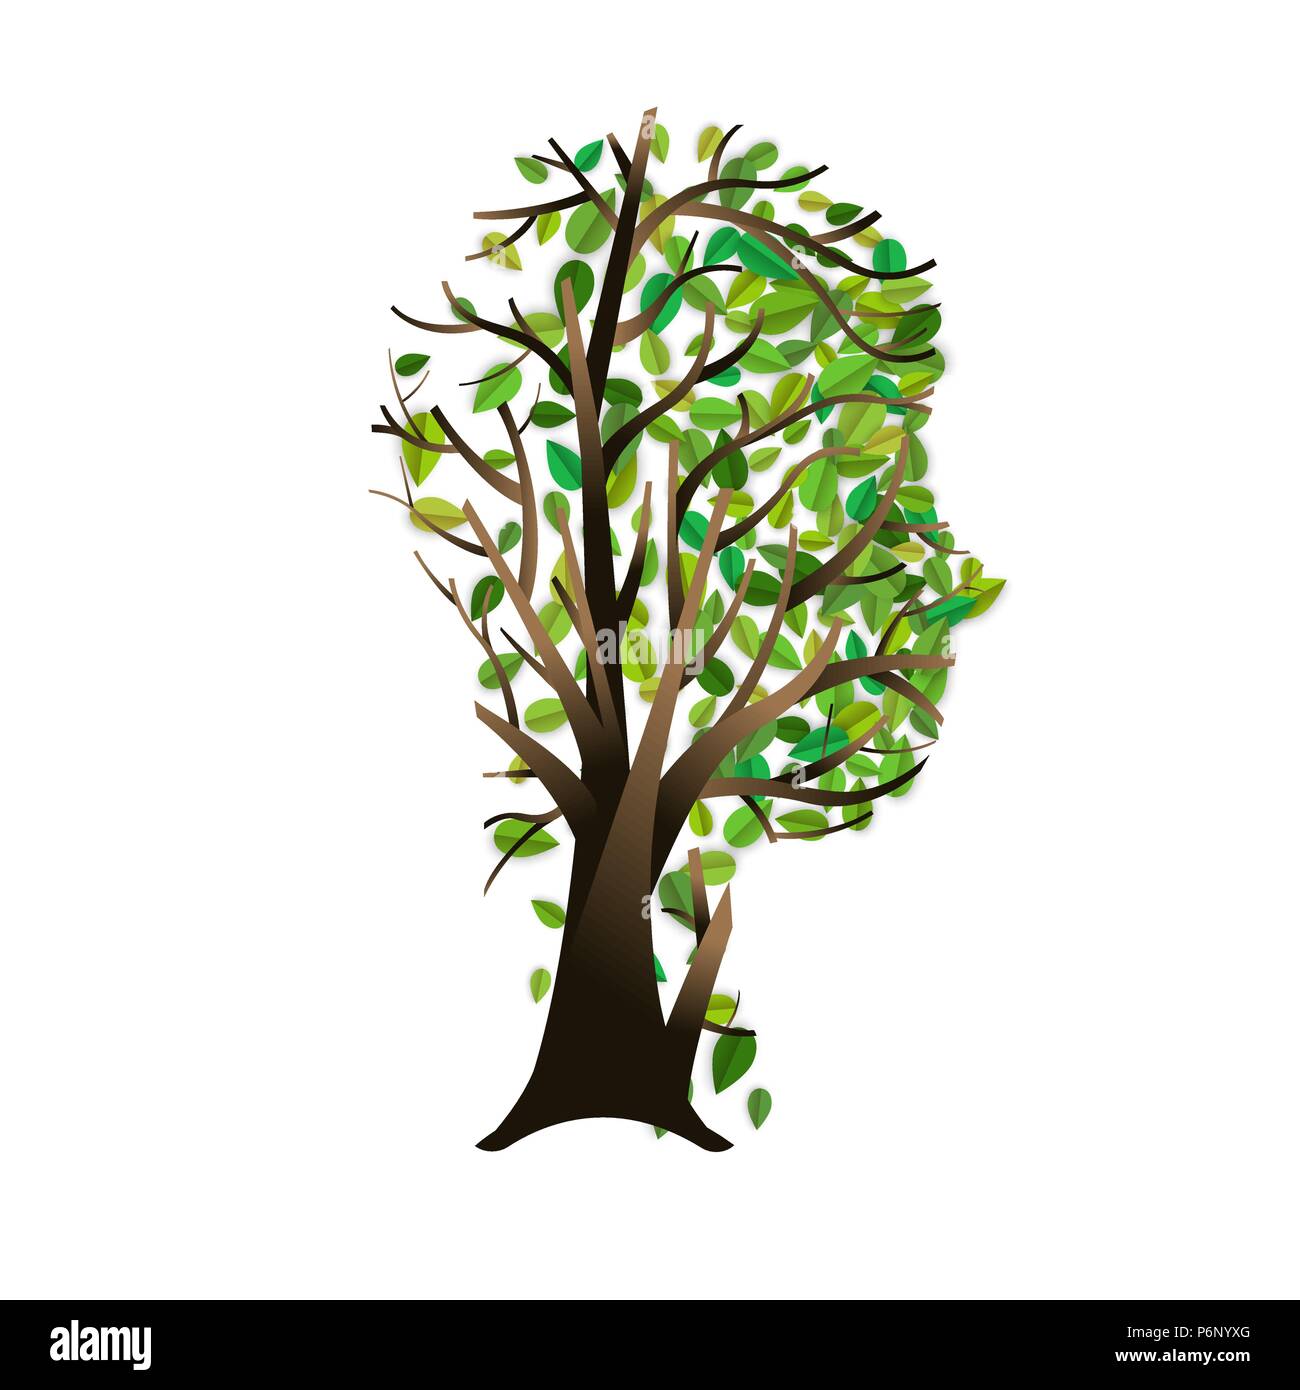 Tree made with leaves in human head shape. Think green concept, Environment help illustration of man profile silhouette. EPS10 vector. Stock Vector